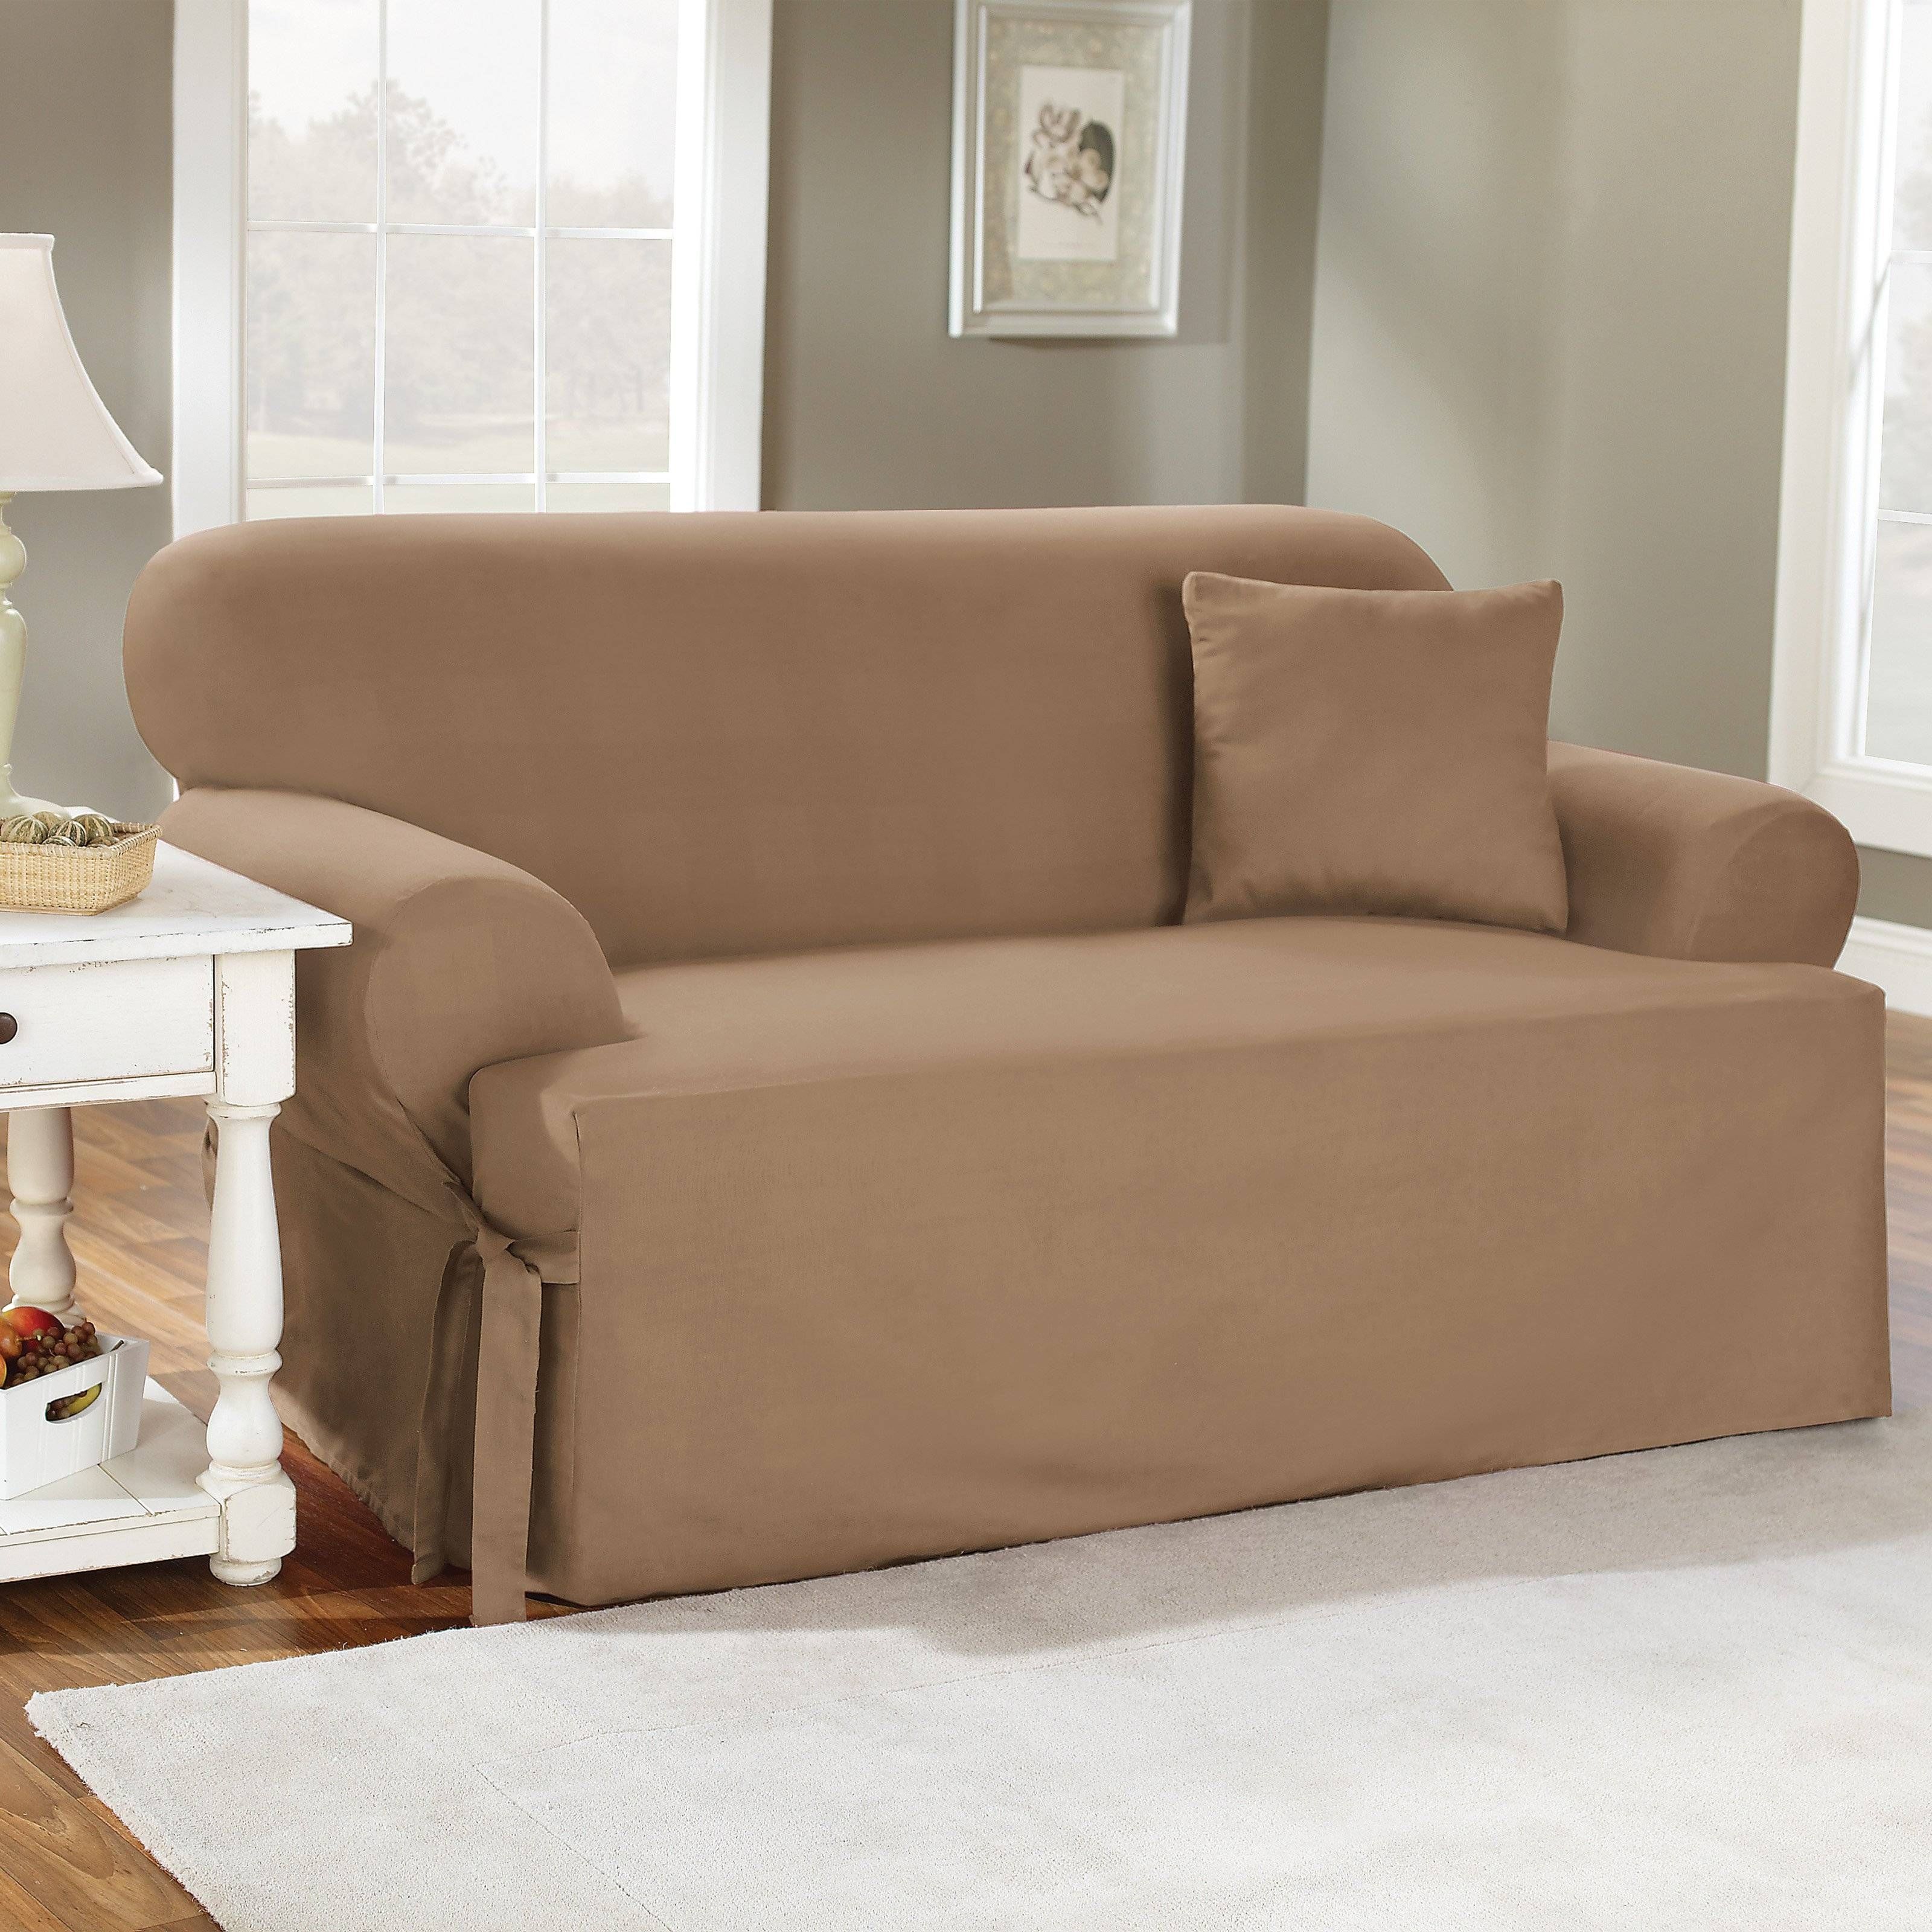 Sure Fit Cotton Duck T Cushion Sofa Slipcover – Walmart In Canvas Sofa Slipcovers (View 8 of 15)